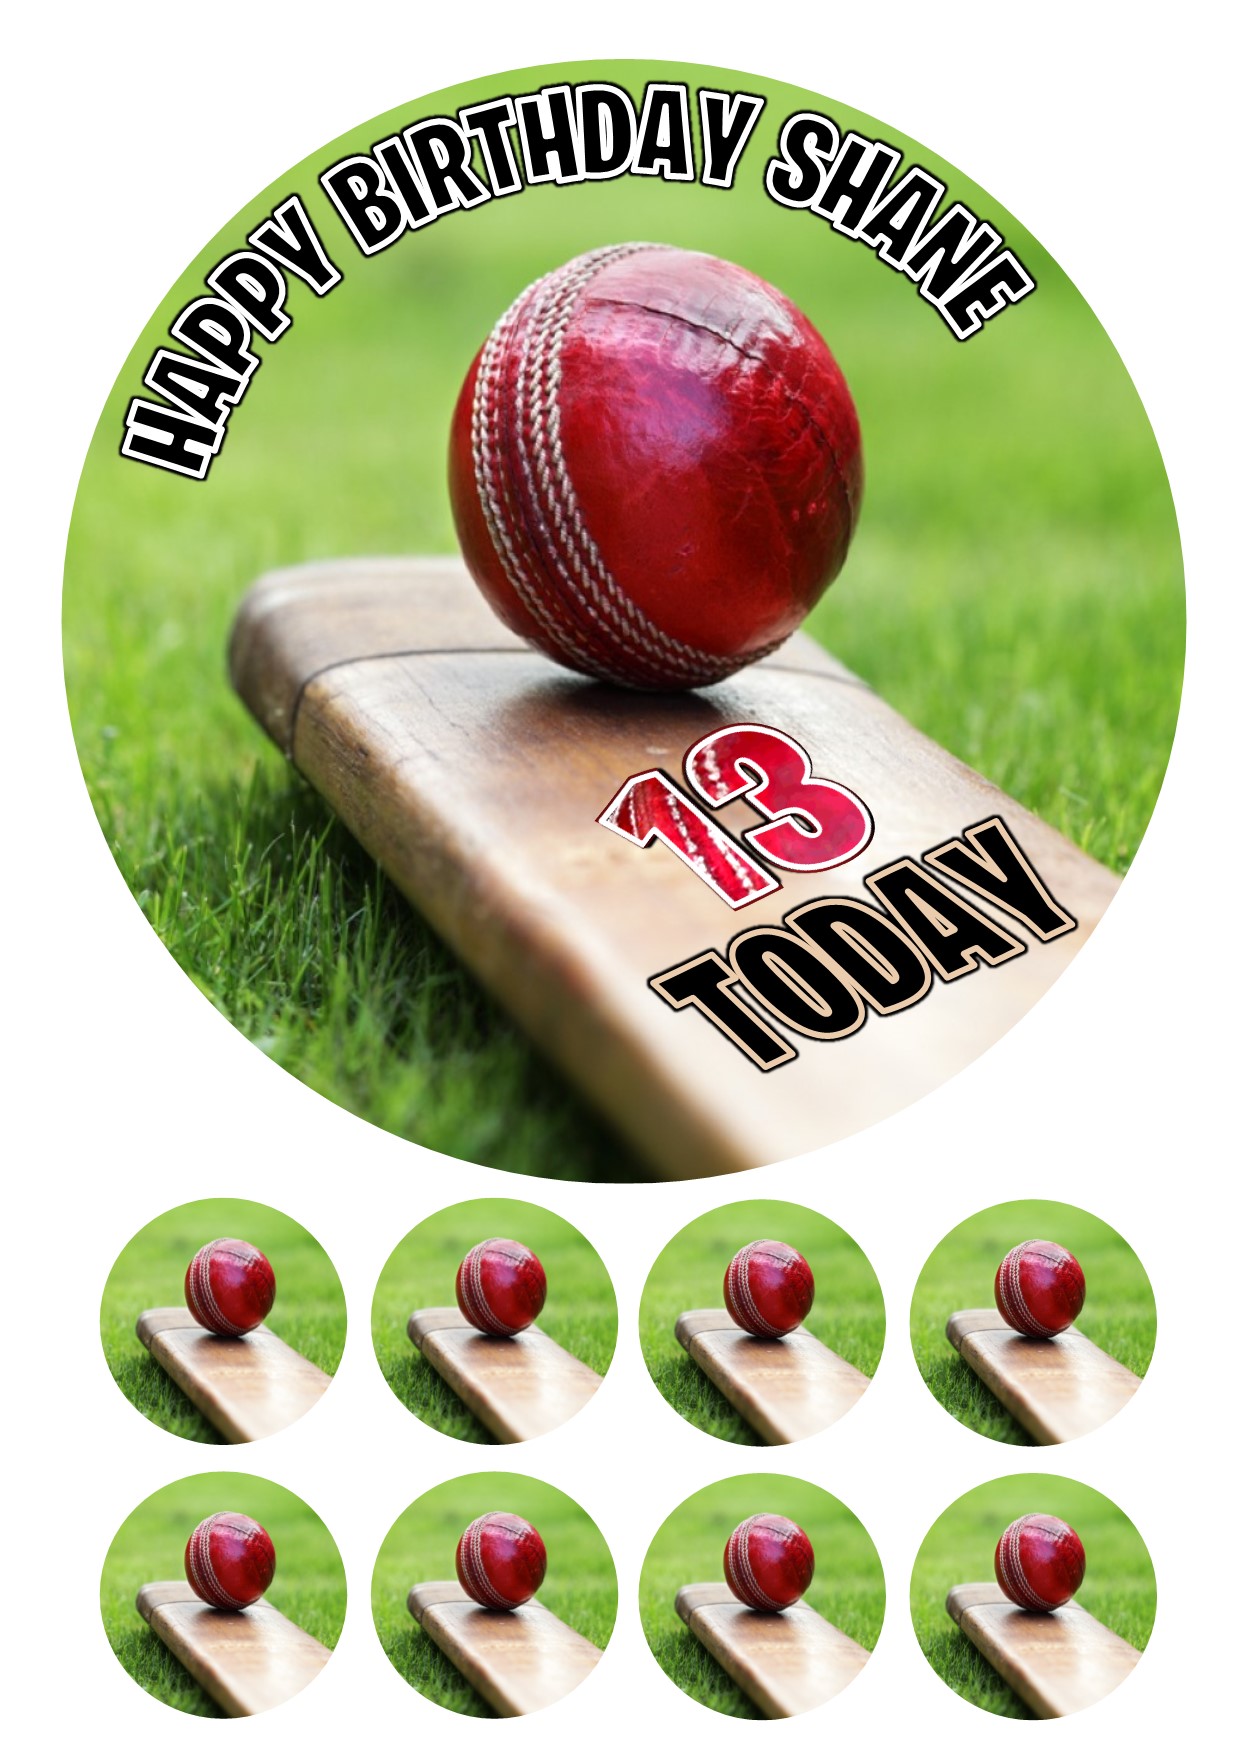 Cricket Bat, Ball & Stumps Stand up Cake Toppers 12 Pack - Etsy